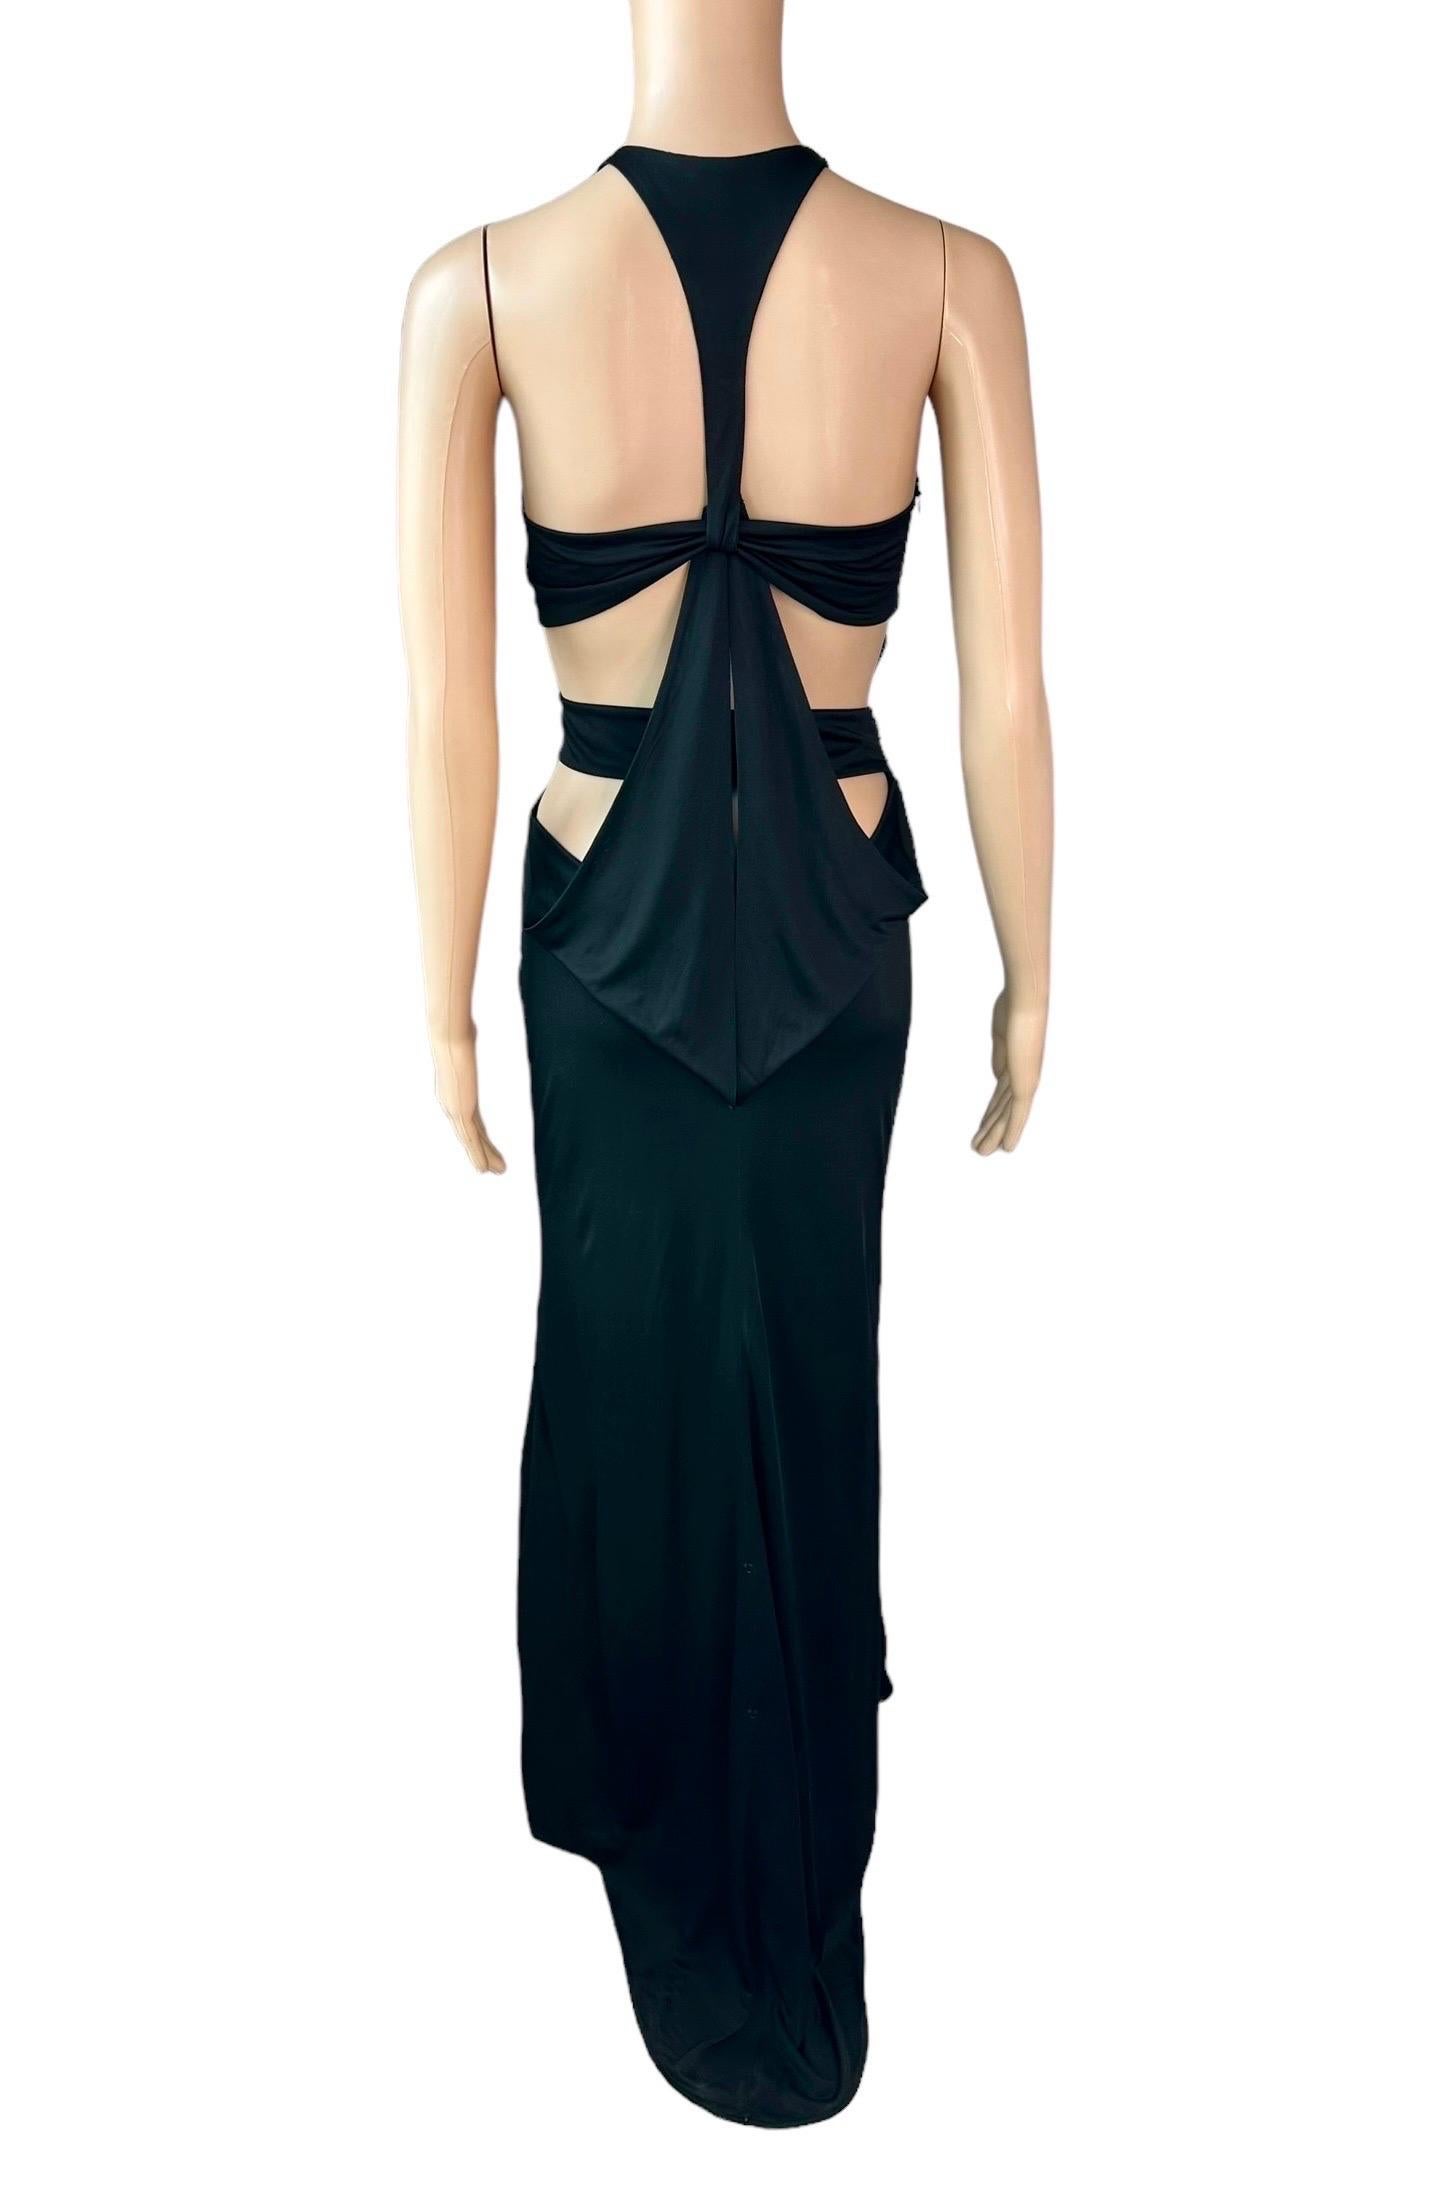 Tom Ford for Gucci F/W 2004 Embellished Plunging Cutout Black Evening Dress Gown In Good Condition For Sale In Naples, FL